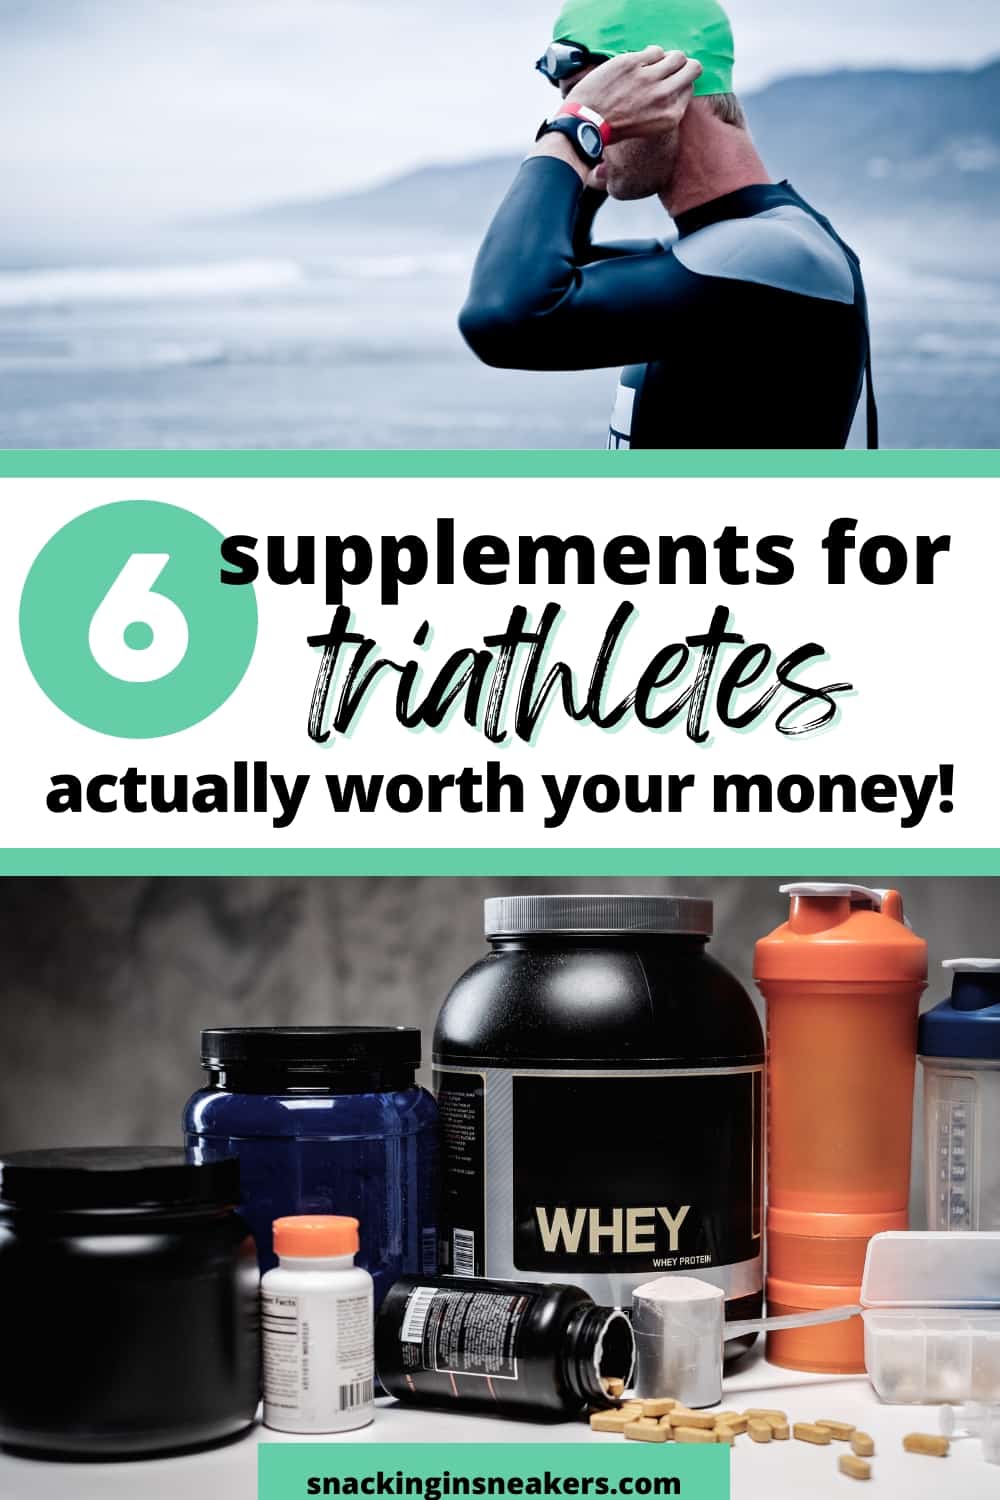 A triathlete with a wetsuit on and an image of several supplement bottles, with a text overlay that says supplements for triathletes actually worth your money.